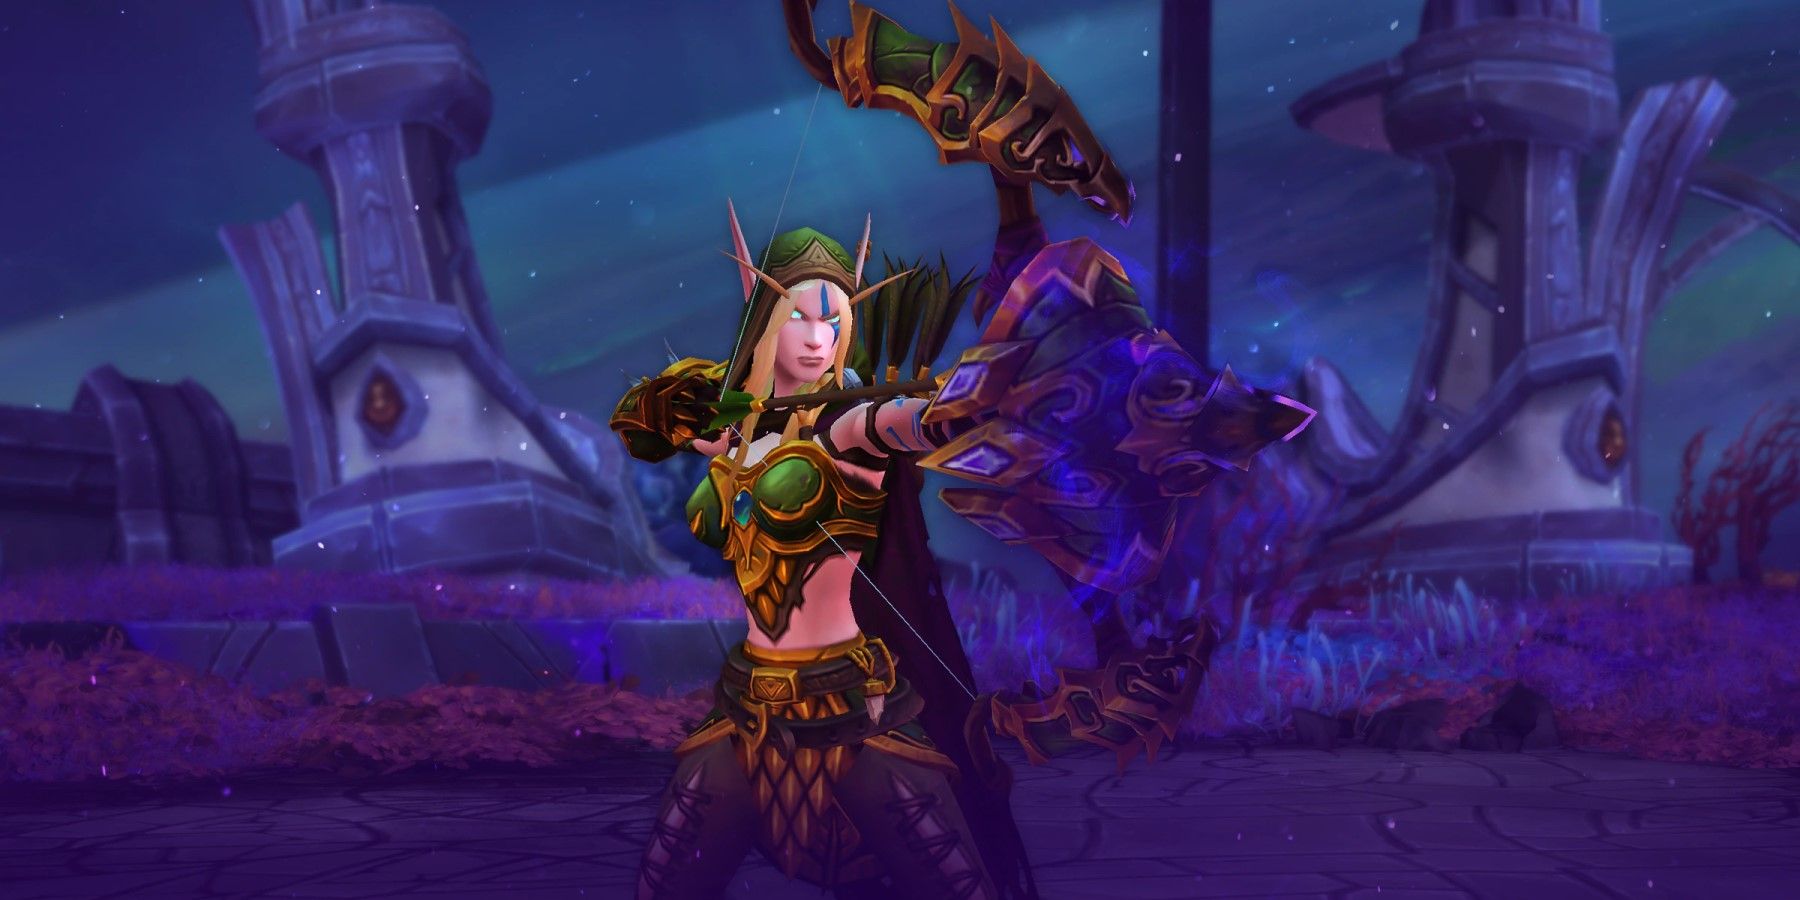 alleria windrunner drawing her bow in front of purple ruins and plants